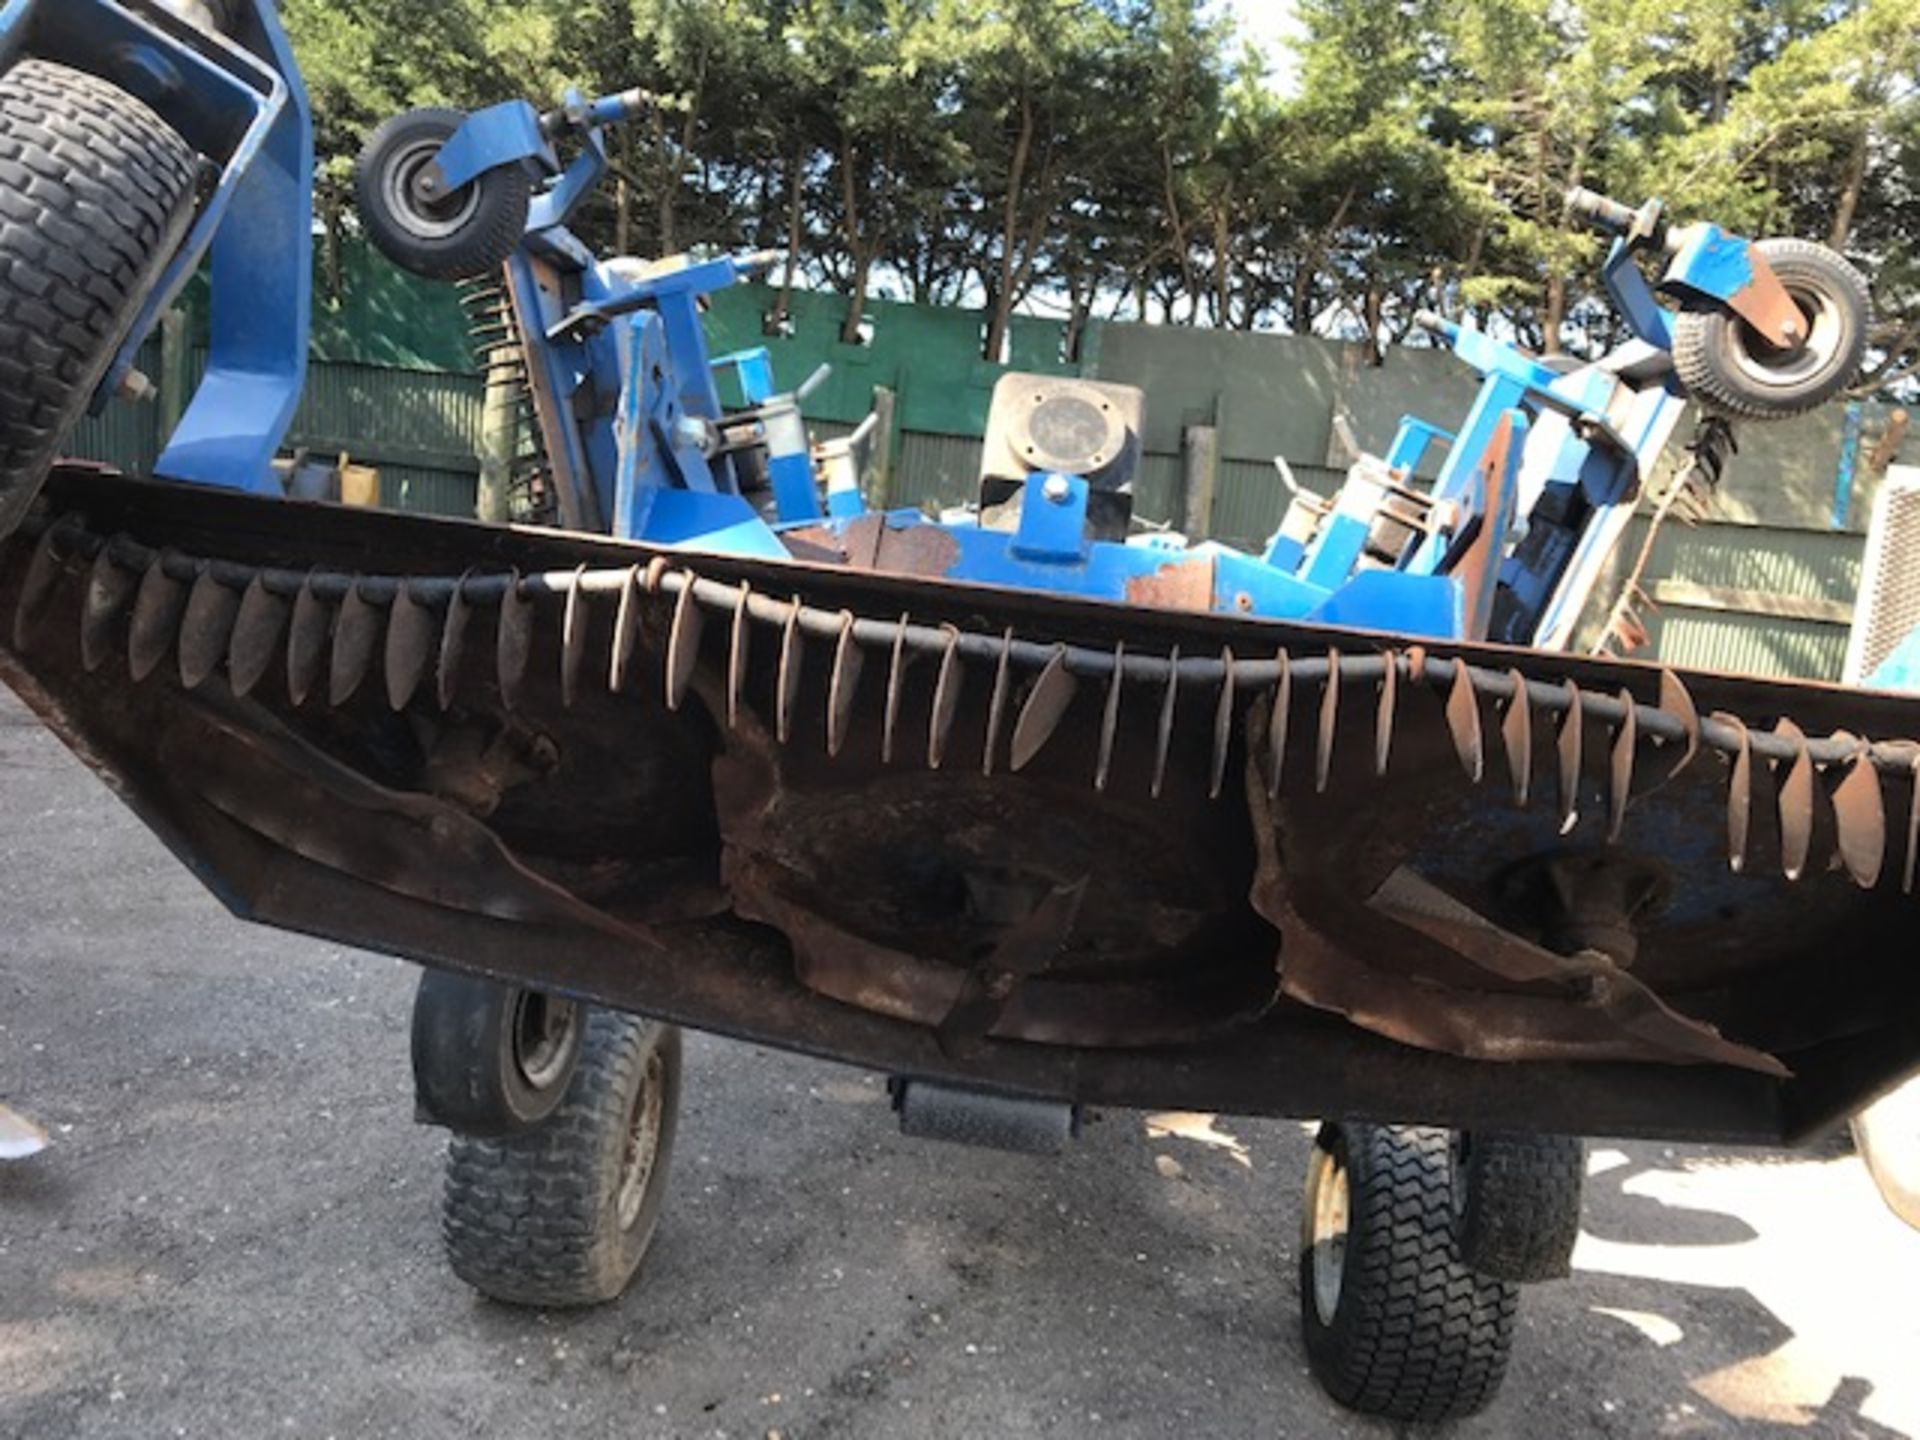 PORT AGRIC NIMROD 12 TRAILED BATWING ROTARY MOWER SET. DIRECT FROM GOLF CLUB, CURRENTLY USED - Image 8 of 10